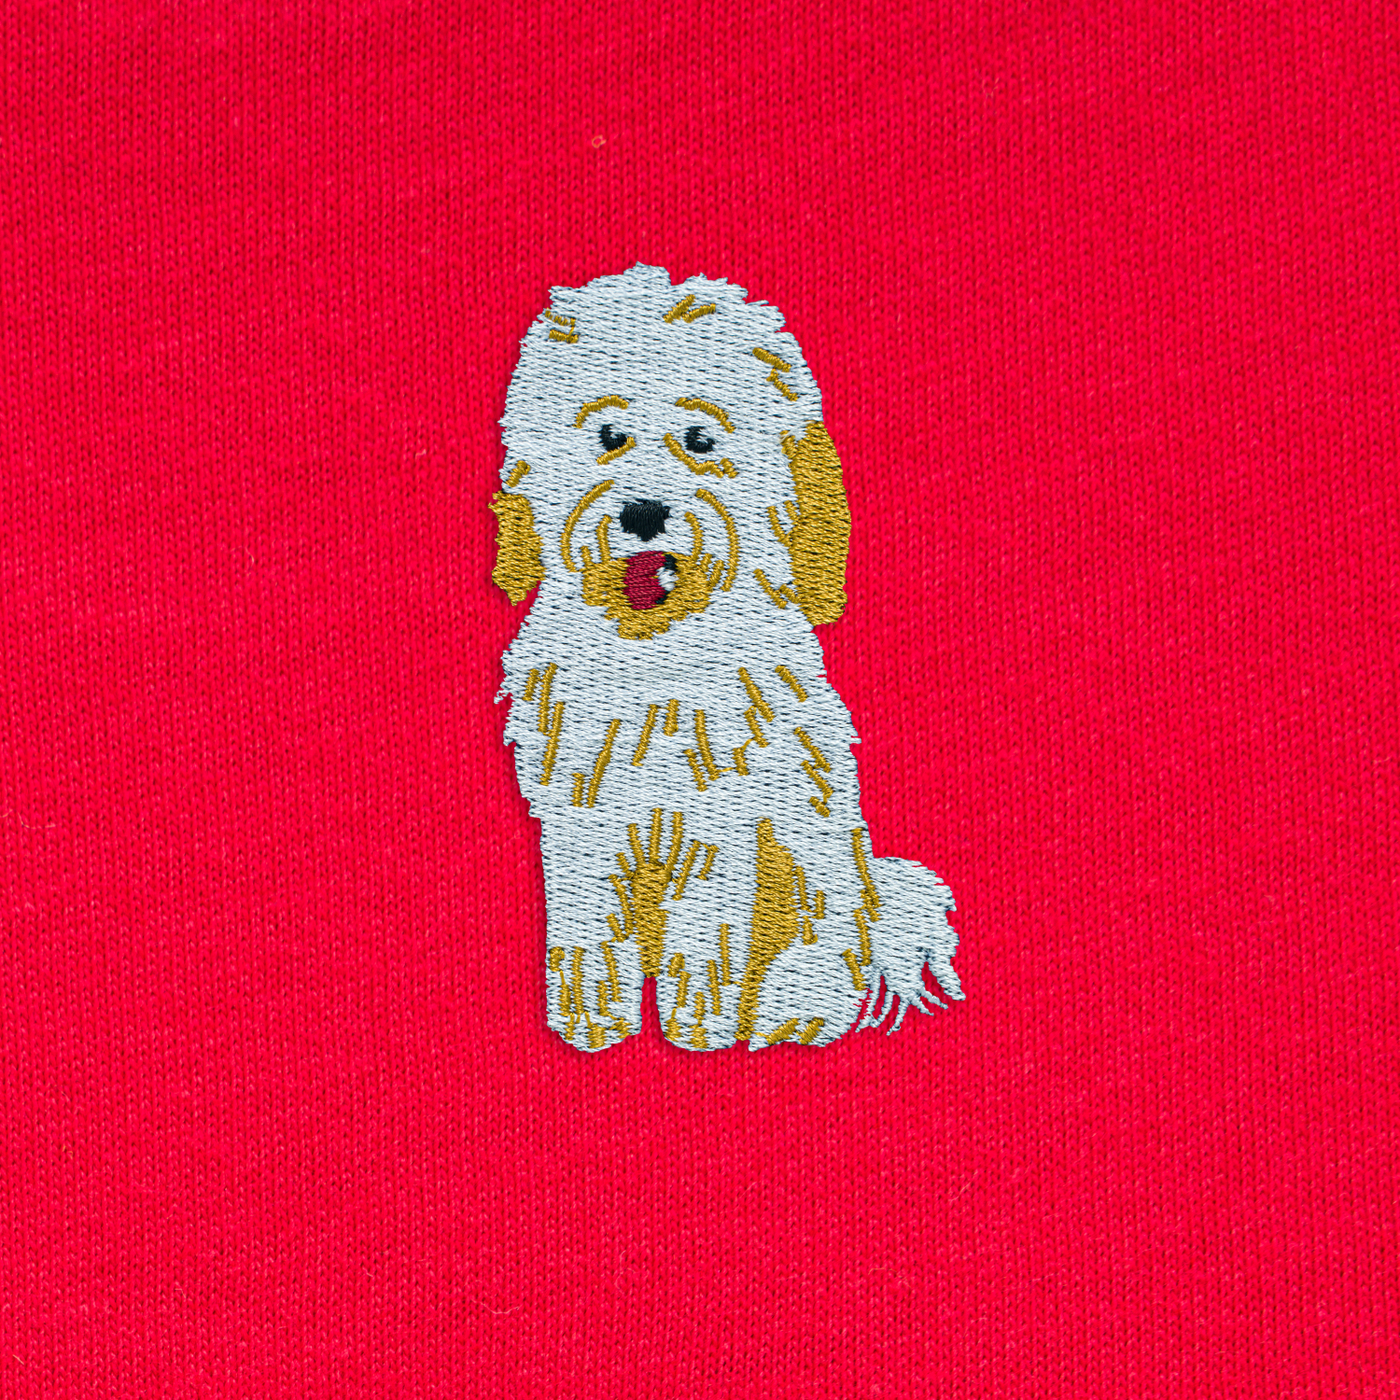 Bobby's Planet Women's Embroidered Poodle Long Sleeve Shirt from Bobbys Planet Toy Poodle Collection in Red Color#color_red